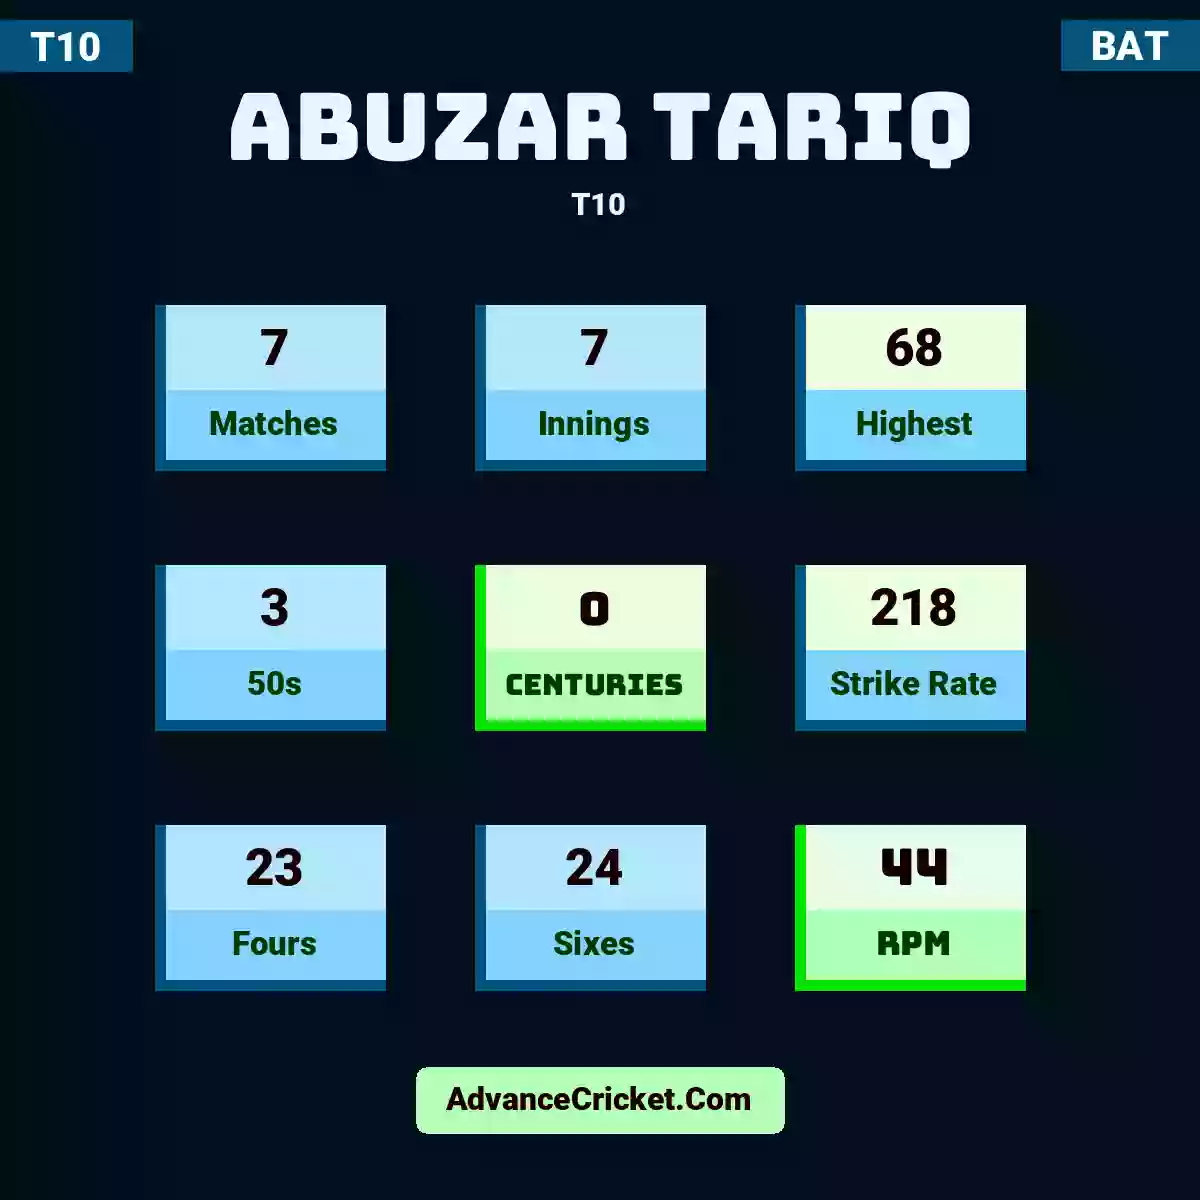 Abuzar Tariq T10 , Abuzar Tariq played 7 matches, scored 68 runs as highest, 3 half-centuries, and 0 centuries, with a strike rate of 218. A.Tariq hit 23 fours and 24 sixes, with an RPM of 44.